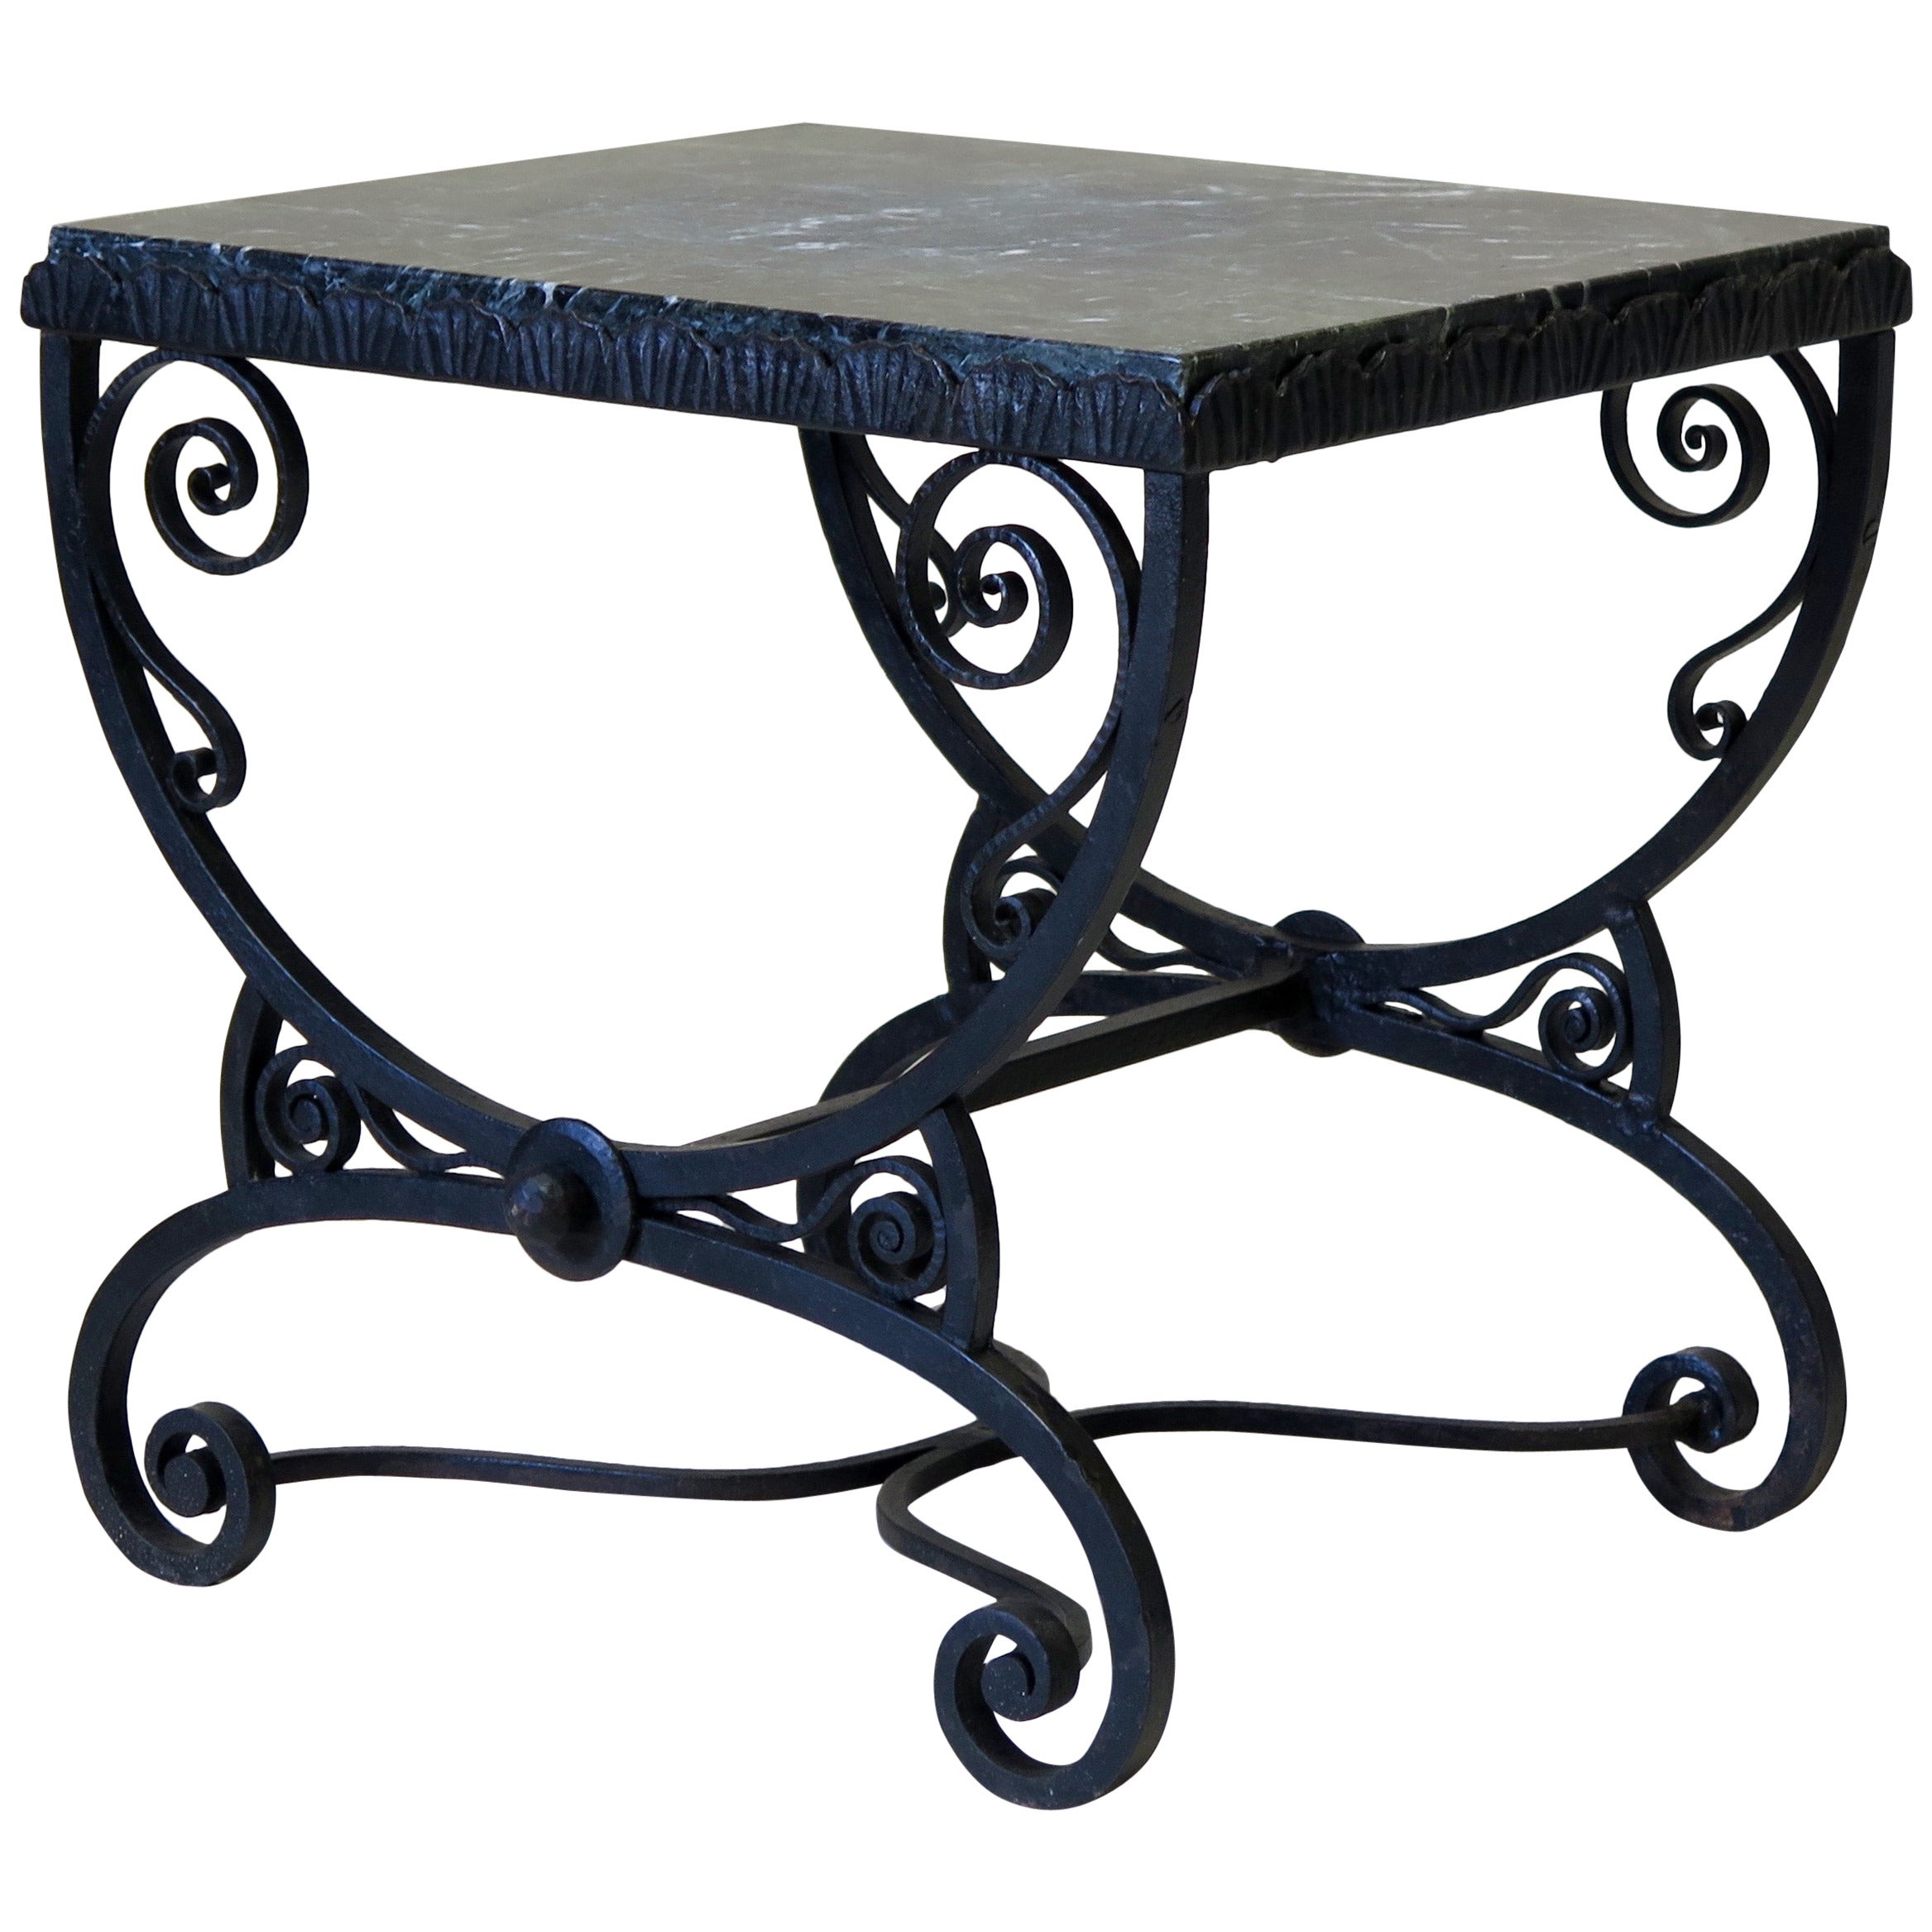 Small Art Deco Wrought Iron Table with Green Marble Top - France, 1930s